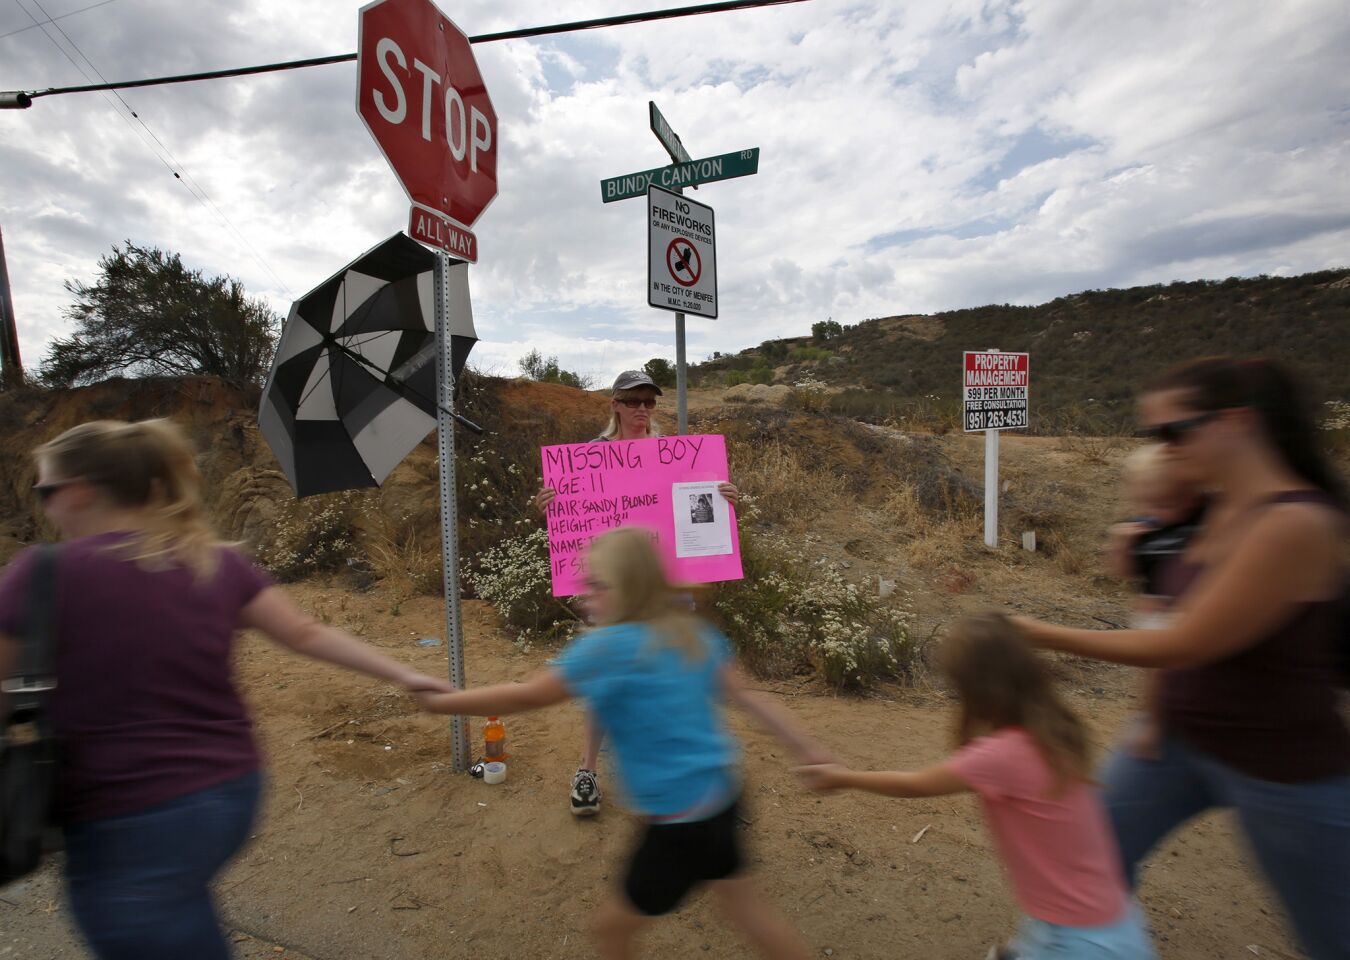 Debi Velivis holds a sign at the intersection of Bundy Canyon Road and Murrieta Road with information about missing 11-year-old Terry Dewayne Smith.